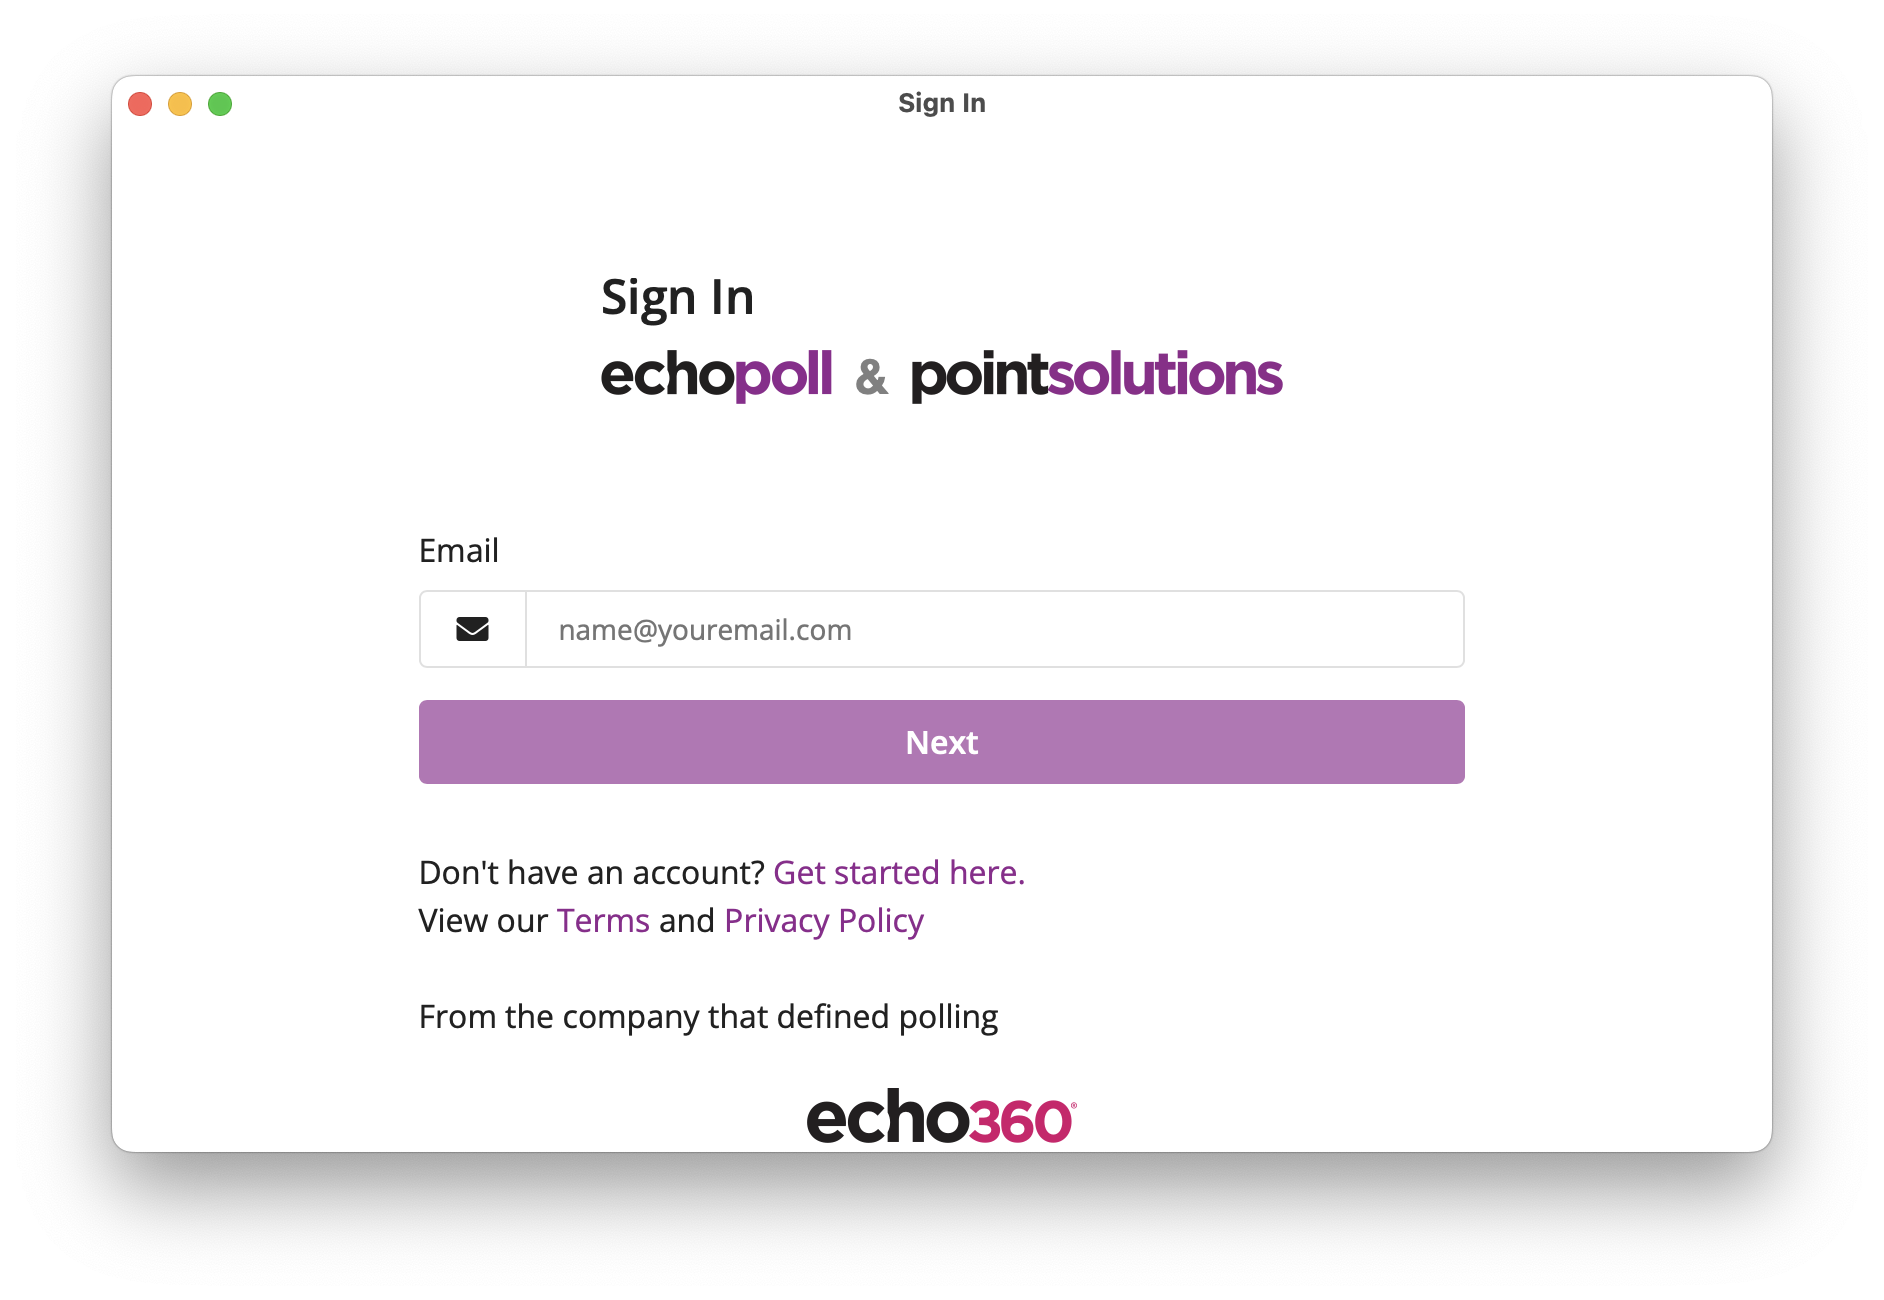 EchoPoll and PointSolutions log in screen shown as described